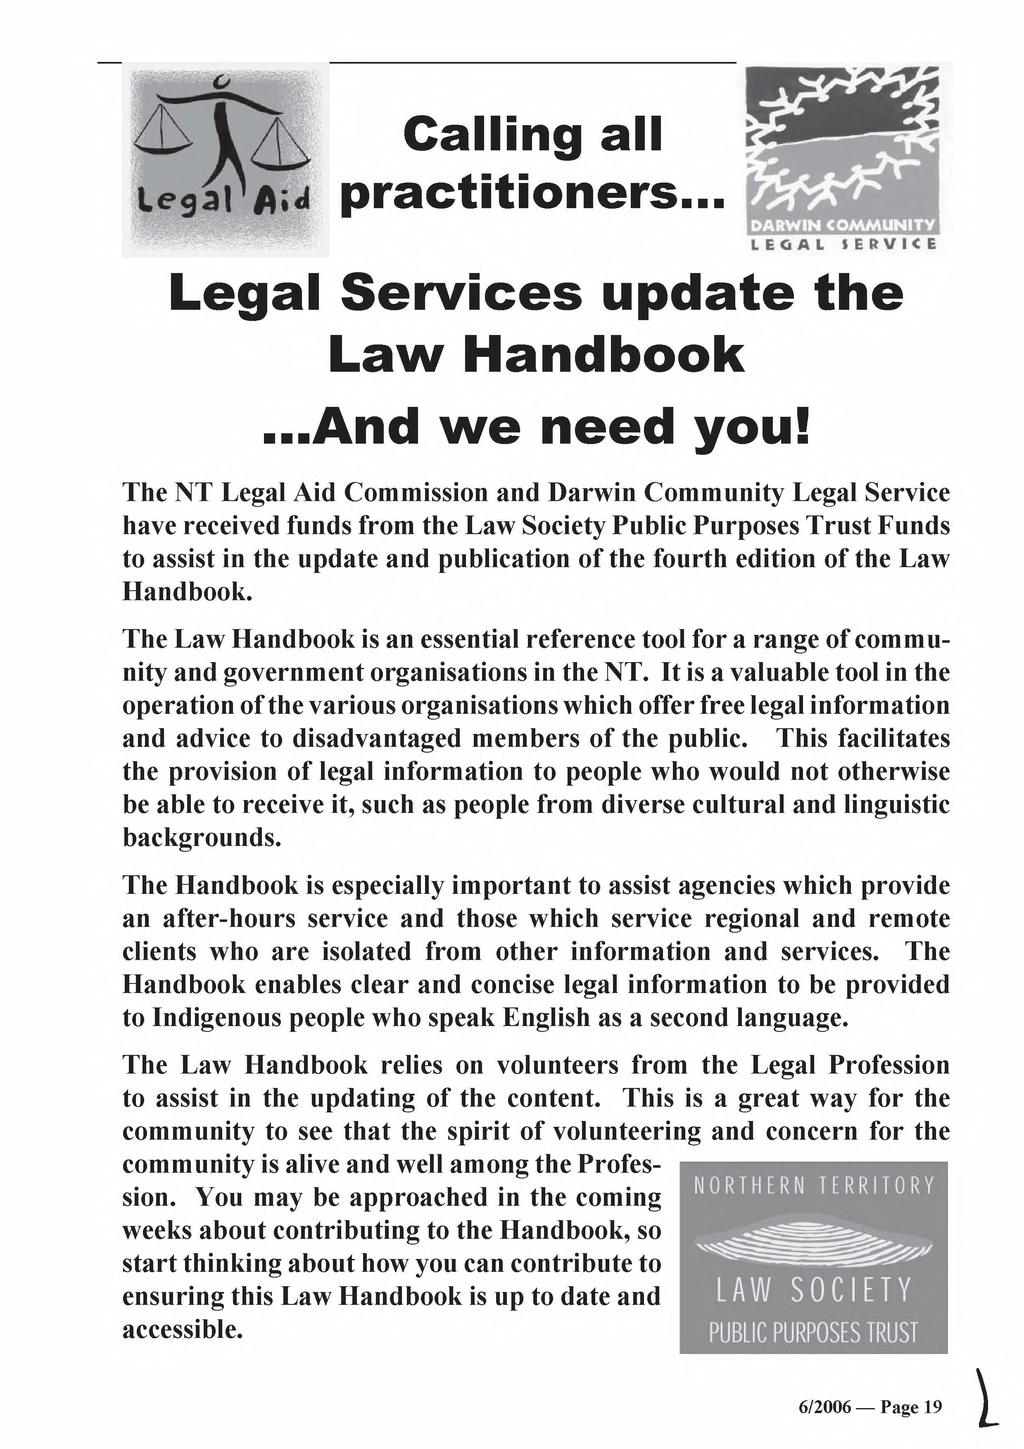 Legal 'Aid Calling all practitioners... 5 Legal Services update the Law Handbook...And we need you!